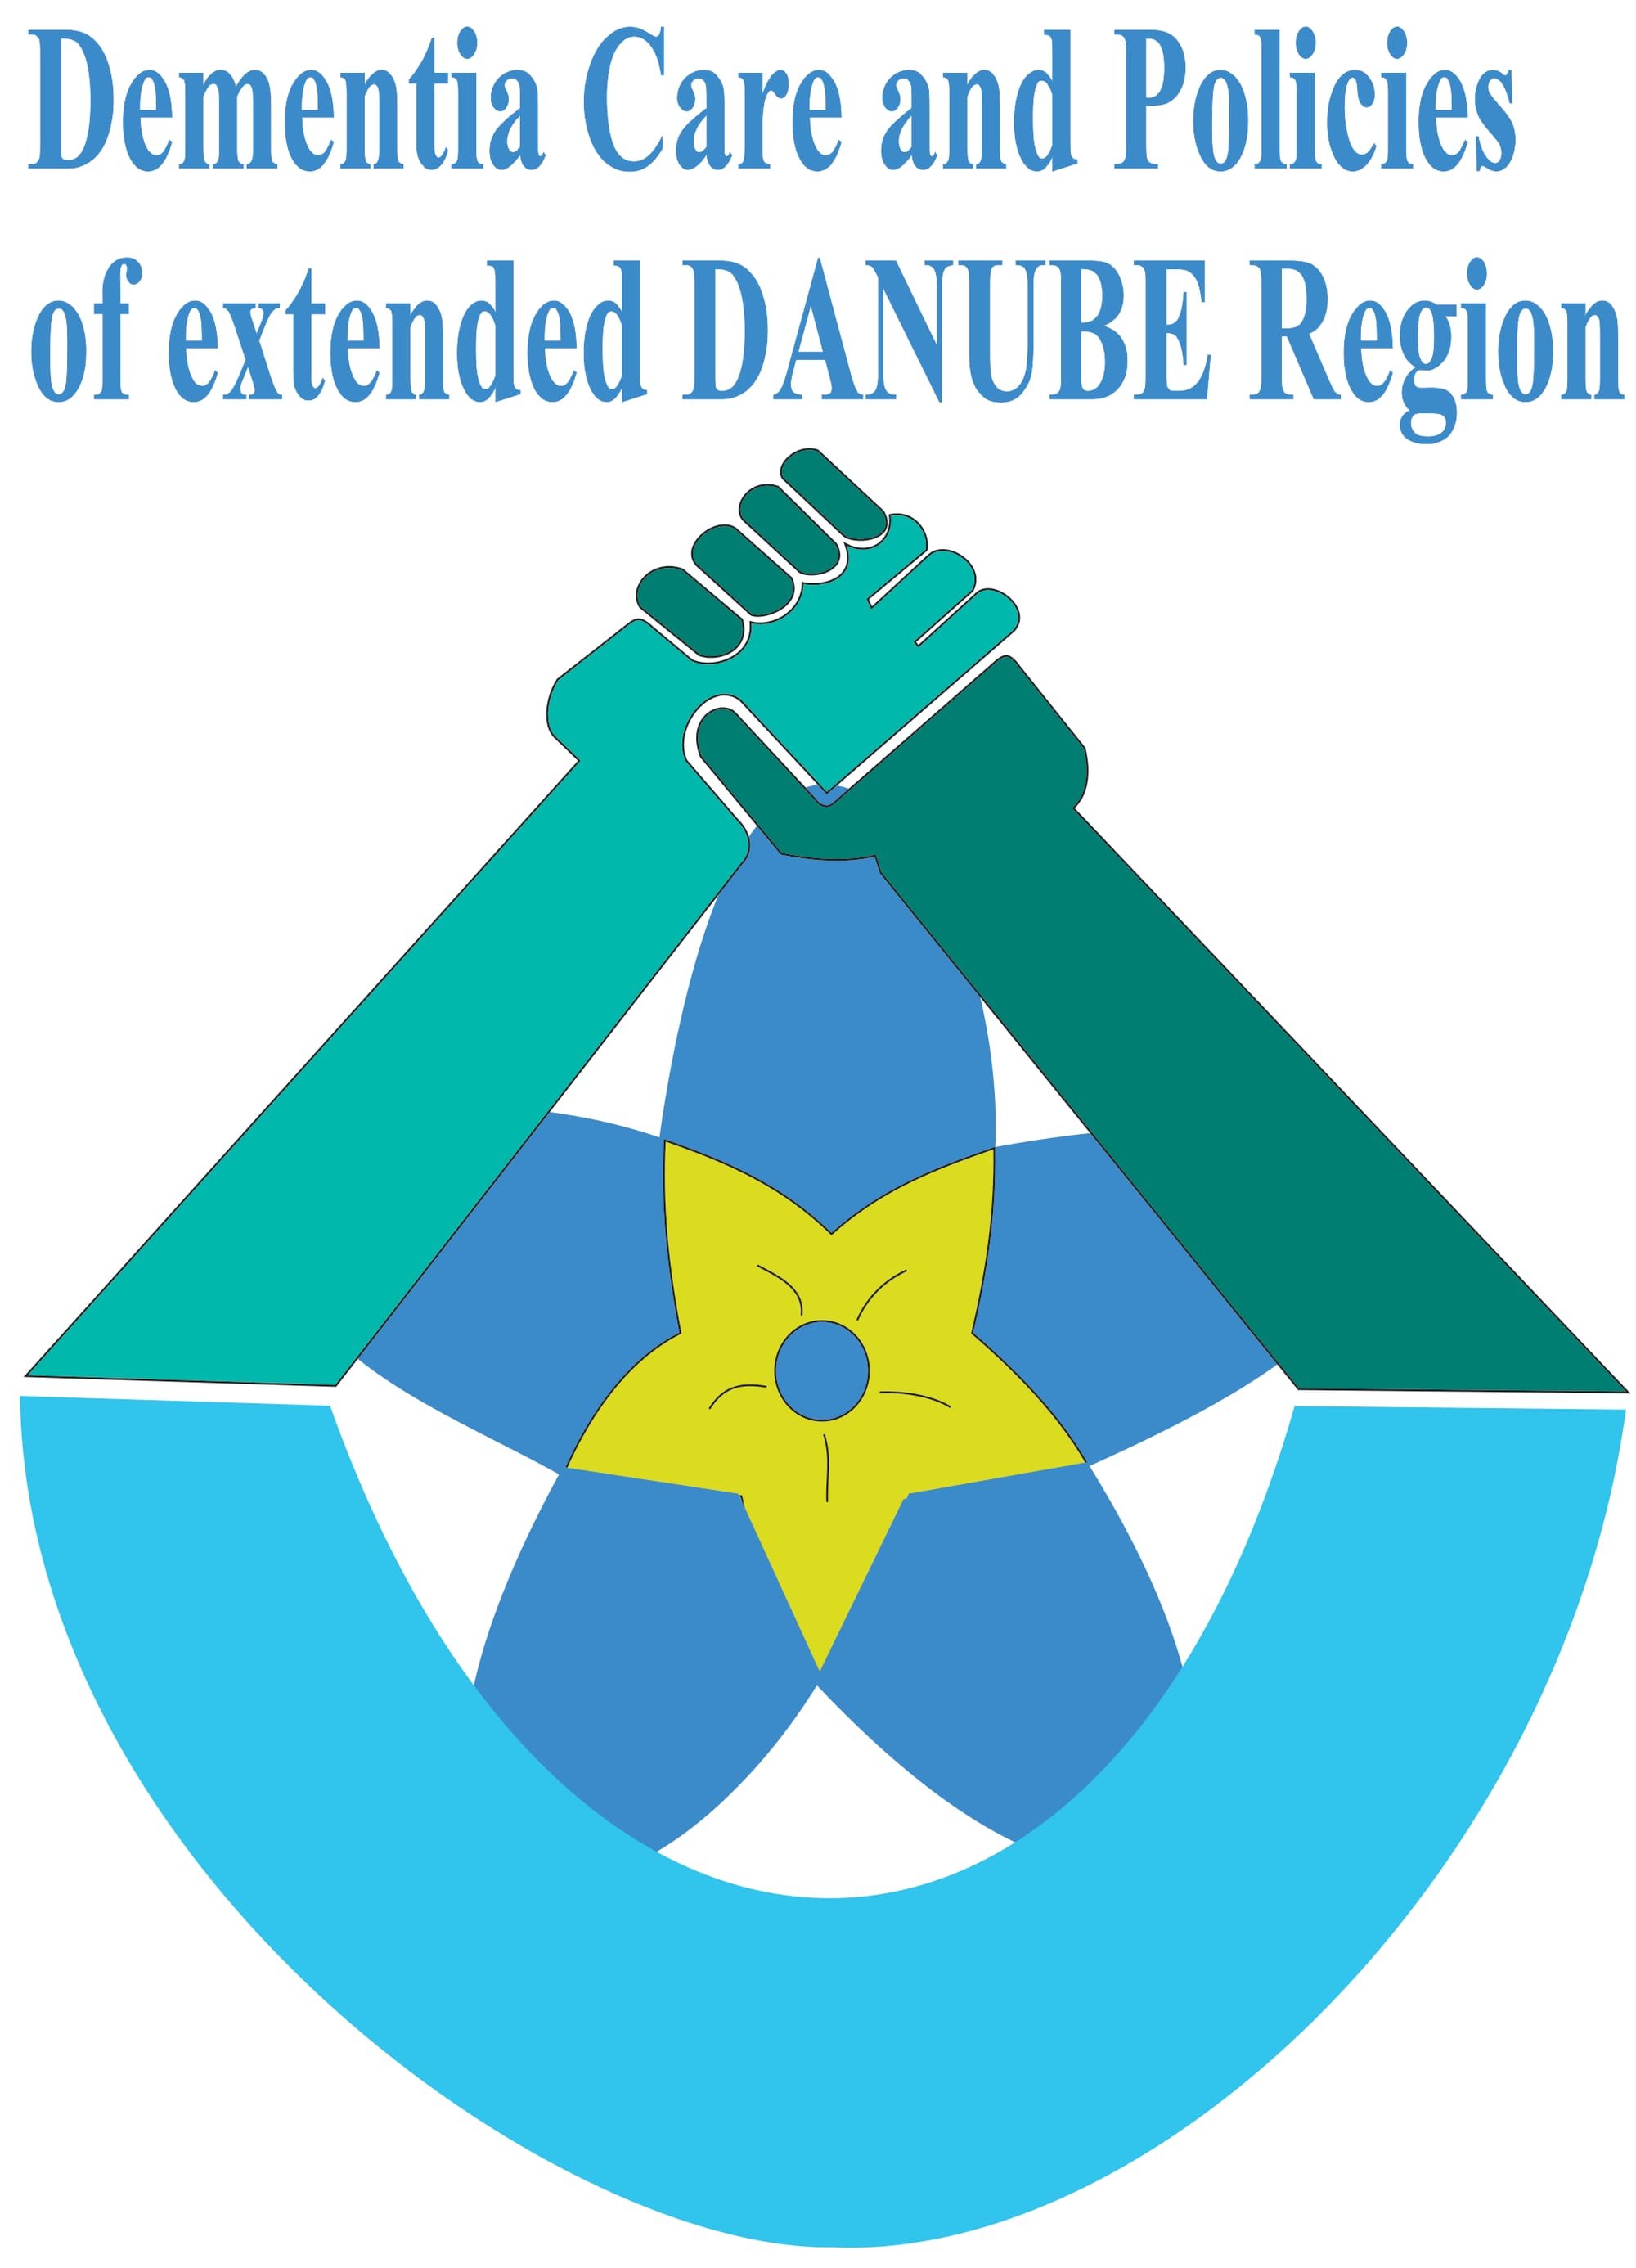 Statement of Experts-Conference "Dementia Care and Policies of extended Danube Region"